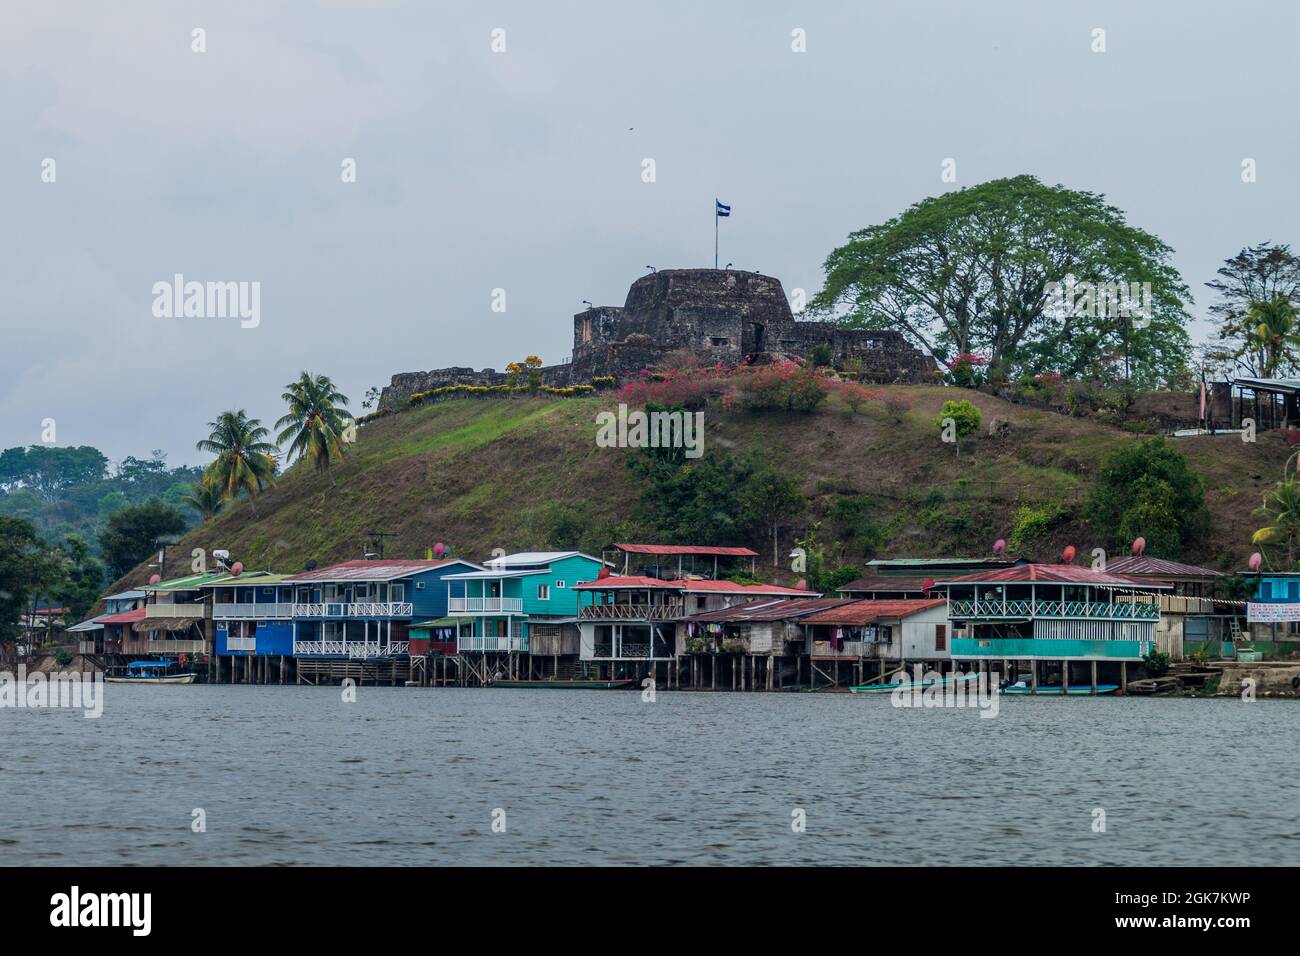 Village Ell Castillo with the Fortress of the Immaculate Conception at San Juan river, Nicaragua Stock Photo